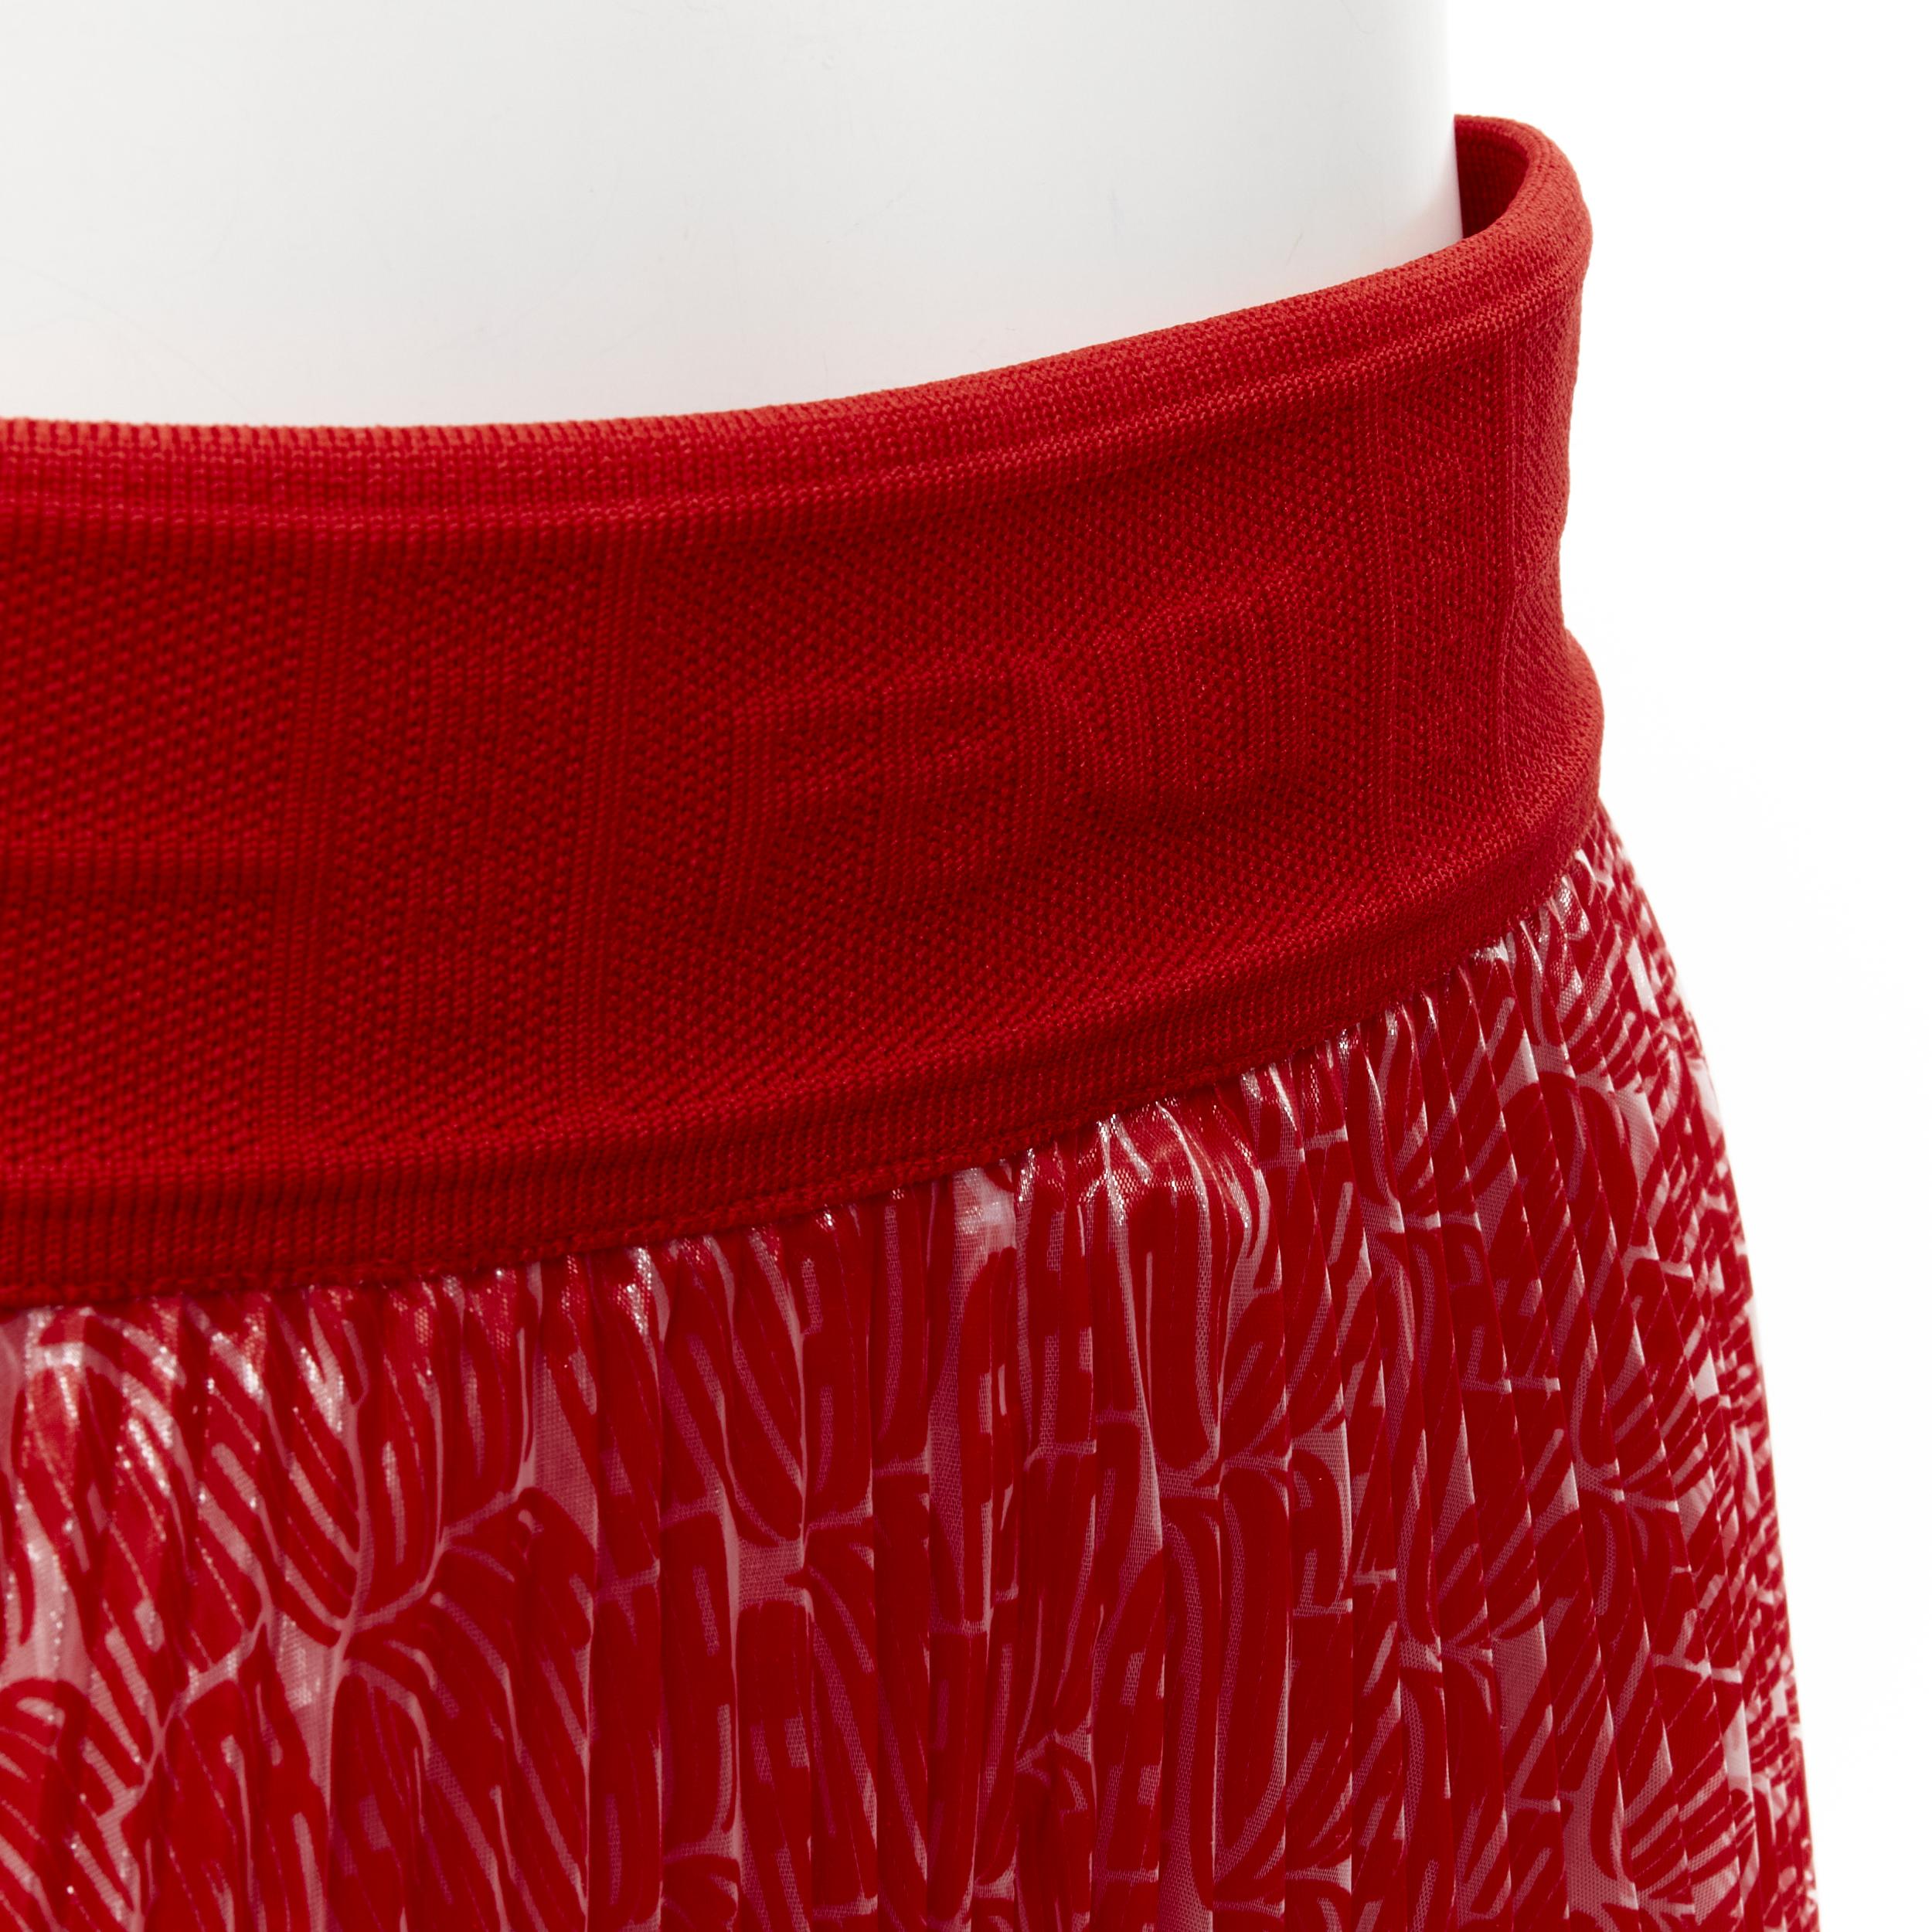 FENDI Roma Amor red graphic print pleated polyester plisse skirt IT42 M
Brand: Fendi
Collection: Roma Amor 
Material: Polyester
Color: Red
Pattern: Graphic
Closure: Zip
Extra Detail: Fendi logo embossed on stretch waist badn. Zip side closure.
Made